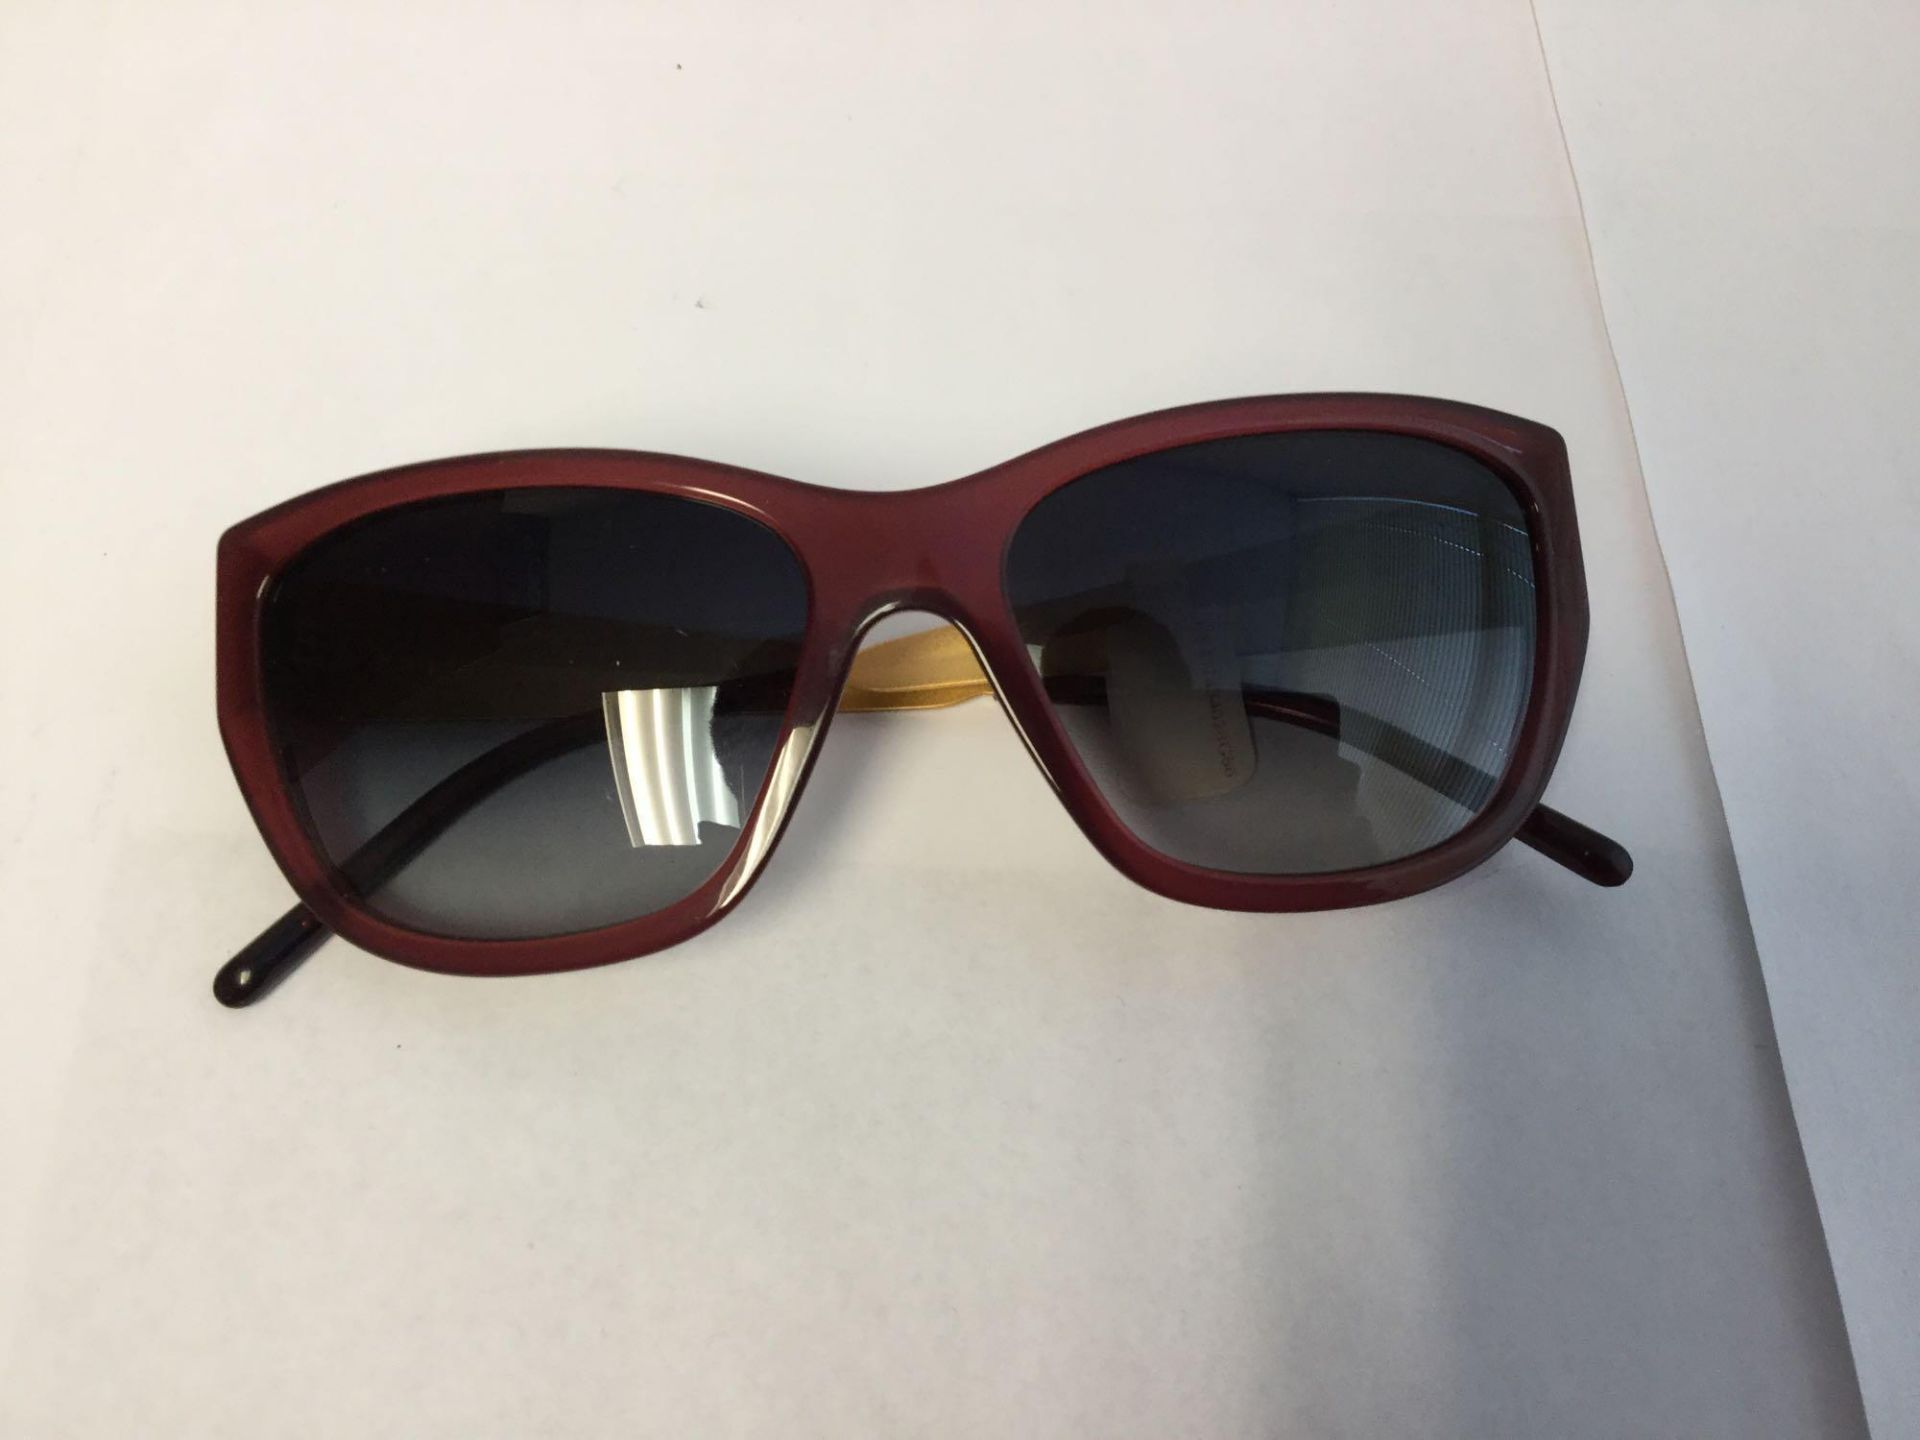 Burberry Sunglasses with Case and Box Value $255 - Image 2 of 4